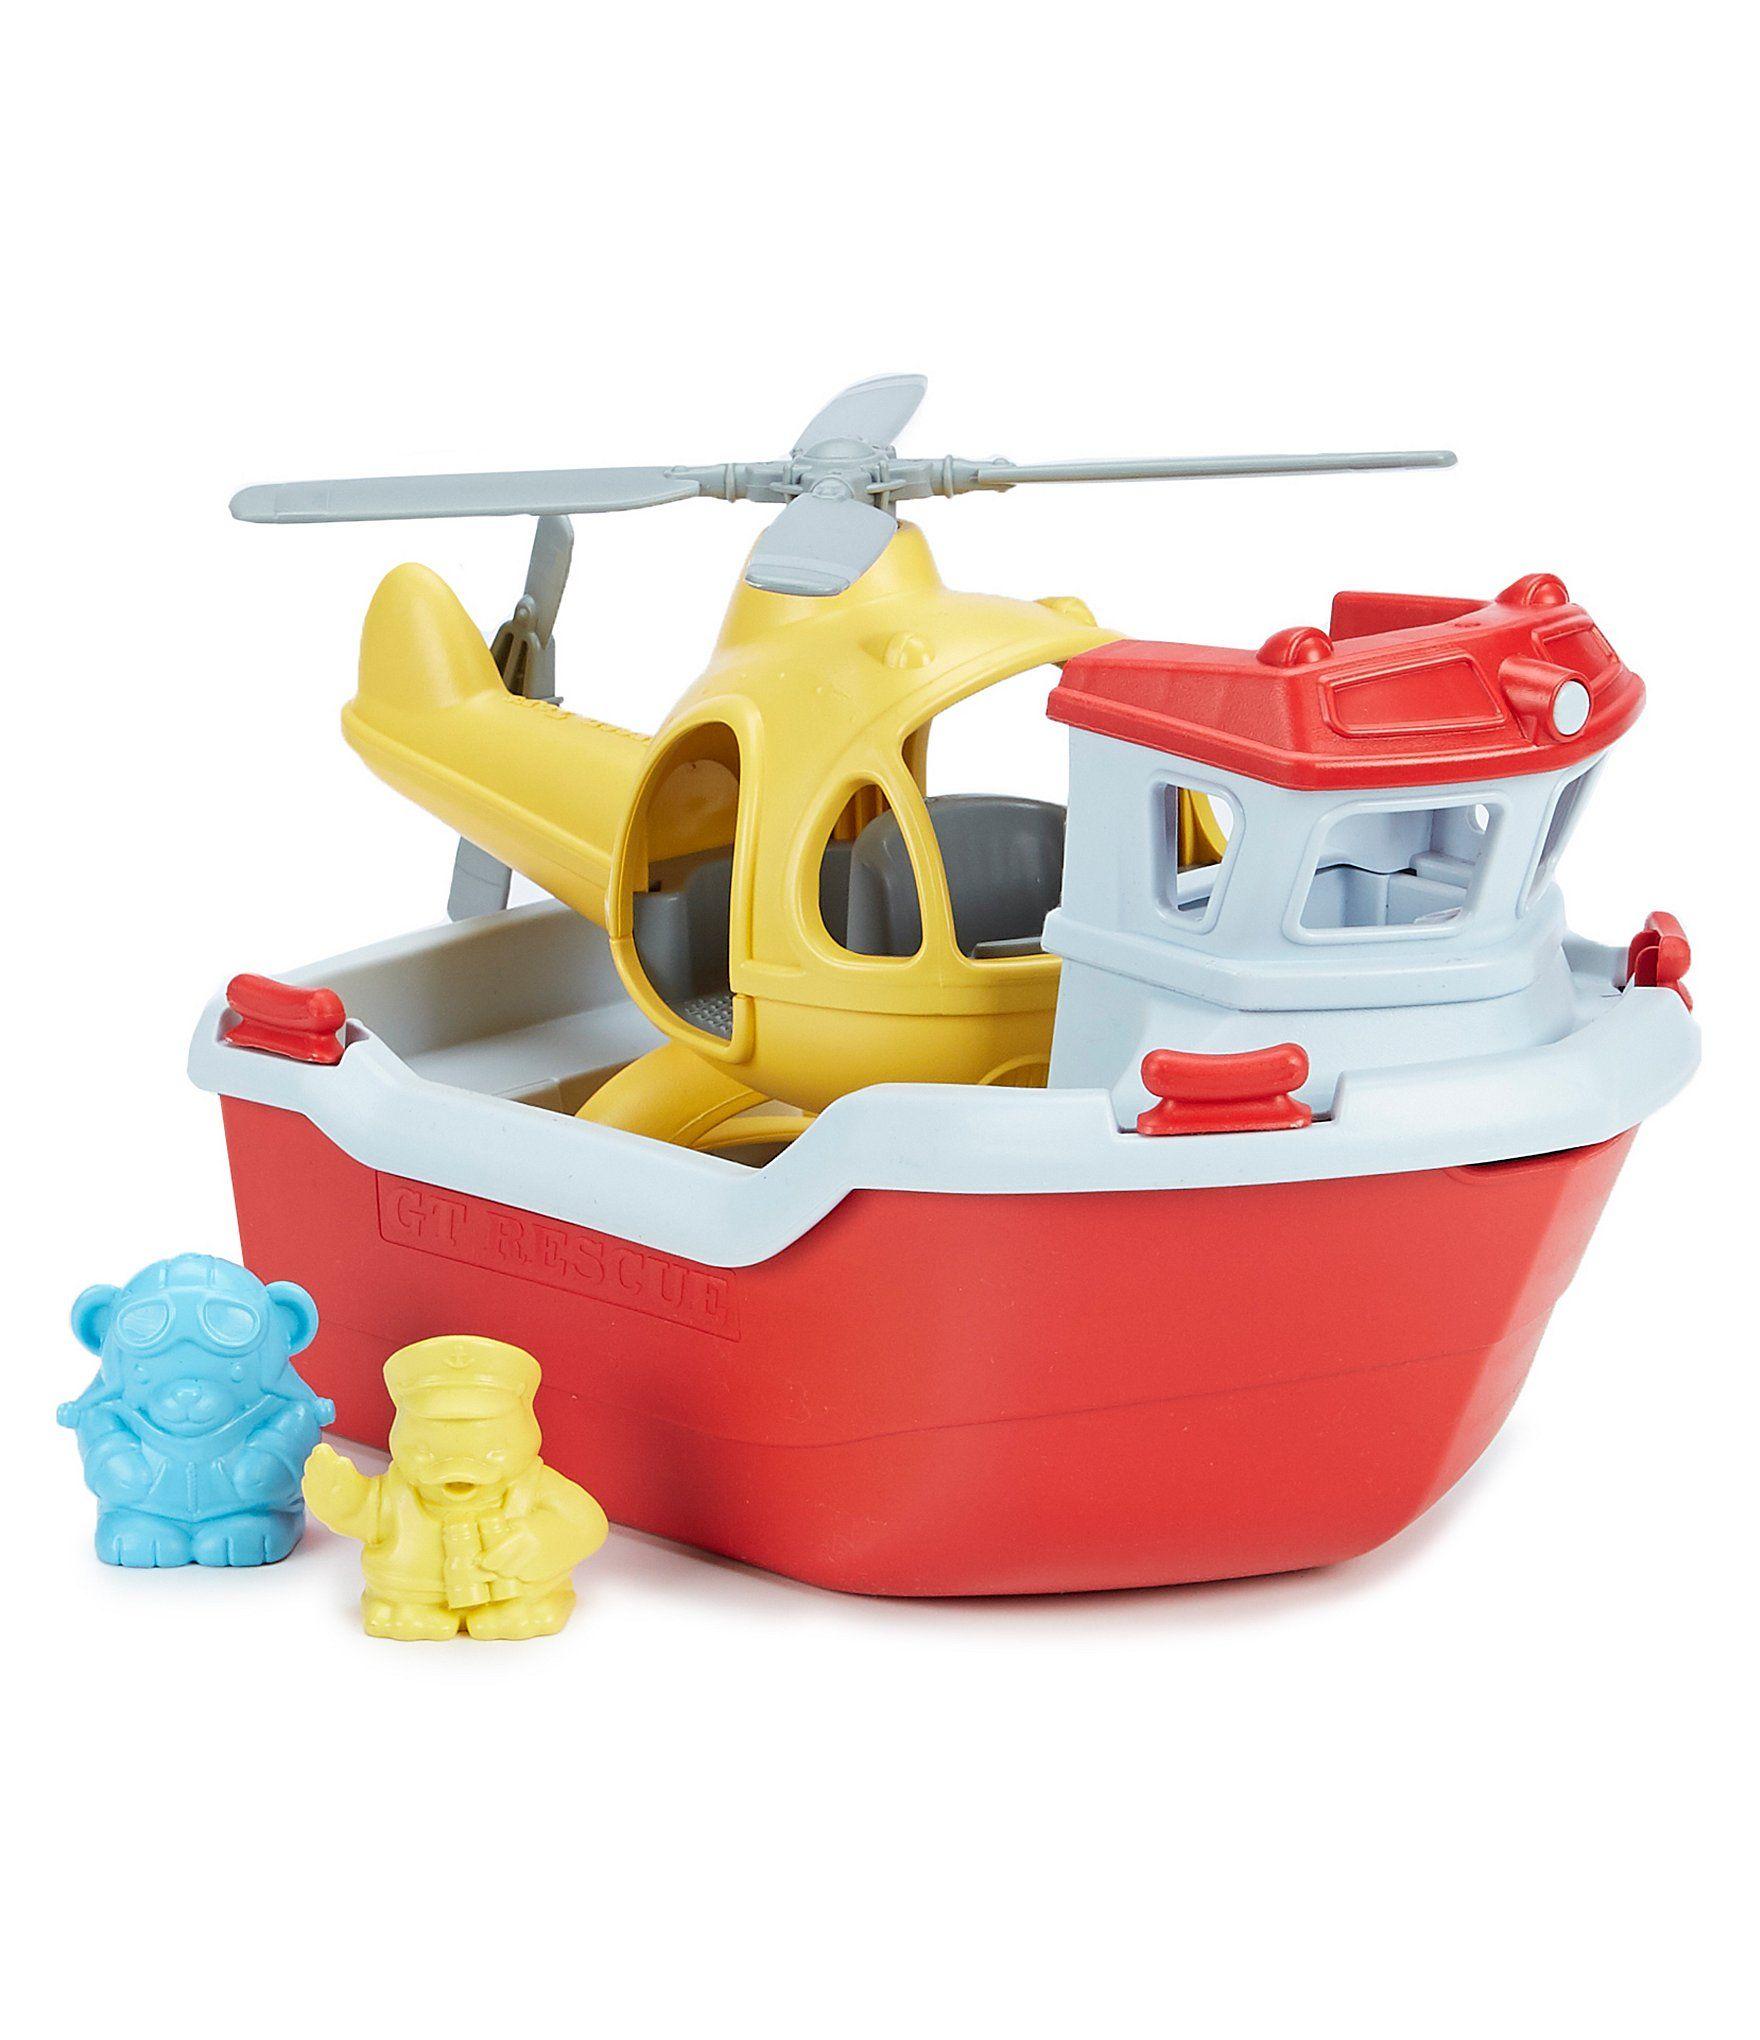 Green Toys Rescue Boat carrying a yellow helicopter.